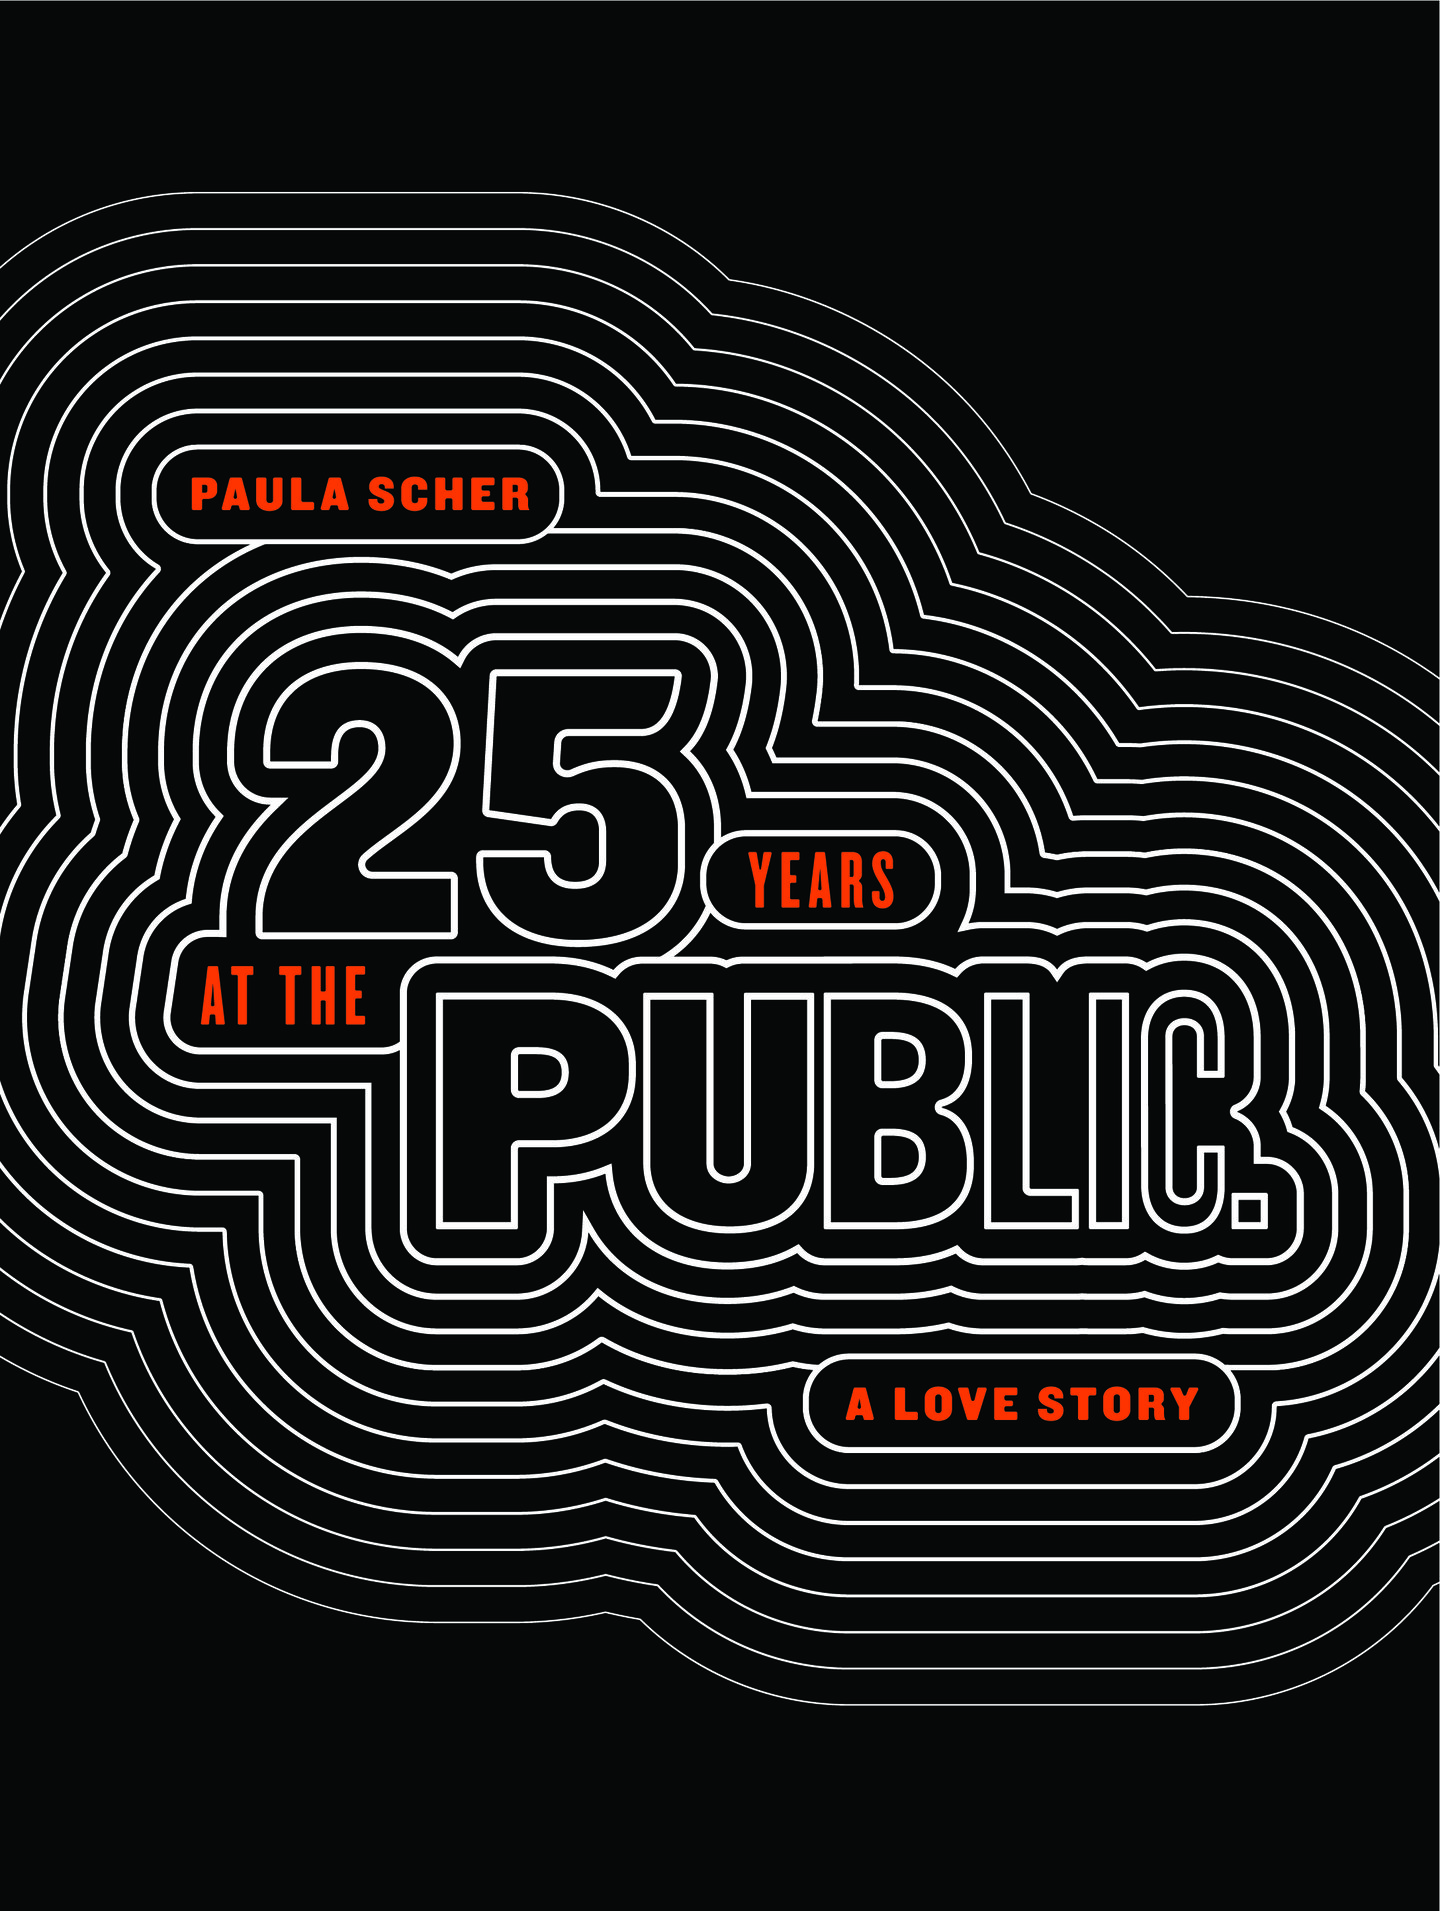 Pentagram S Paula Scher Publishes Book To Mark 25 Years Of Working With Nyc S The Public Theater,Portfolio Design For Students Project